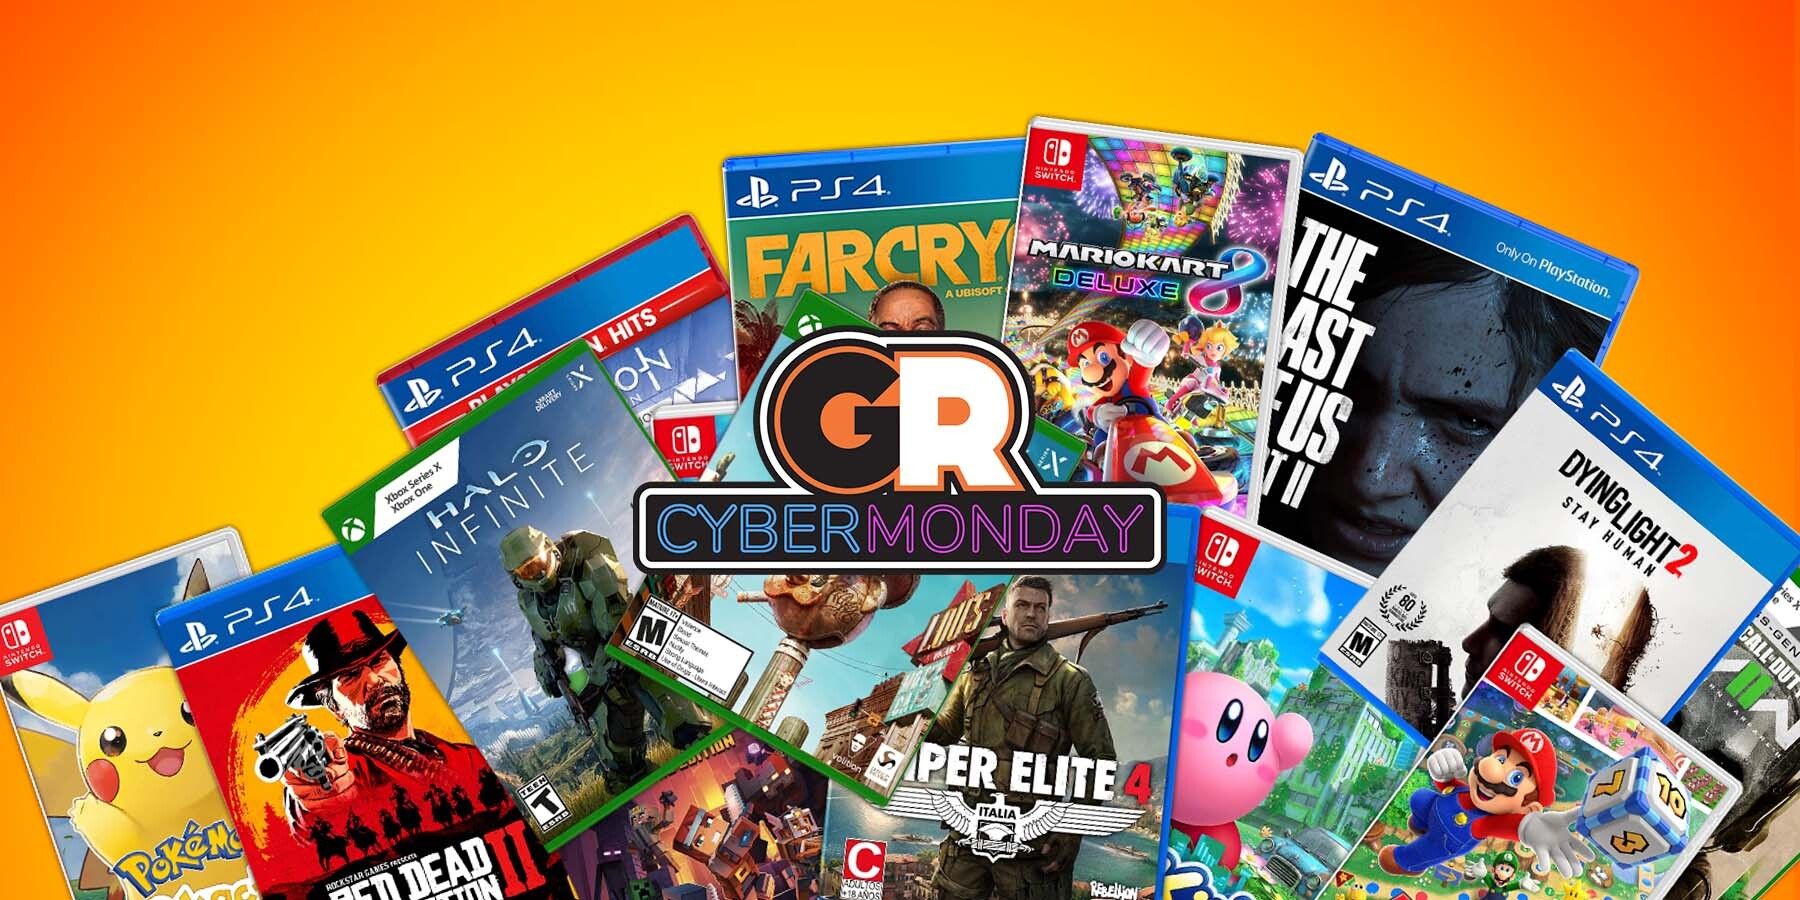 early-cyber-monday-amazon-gamerant-game-deals-thumb